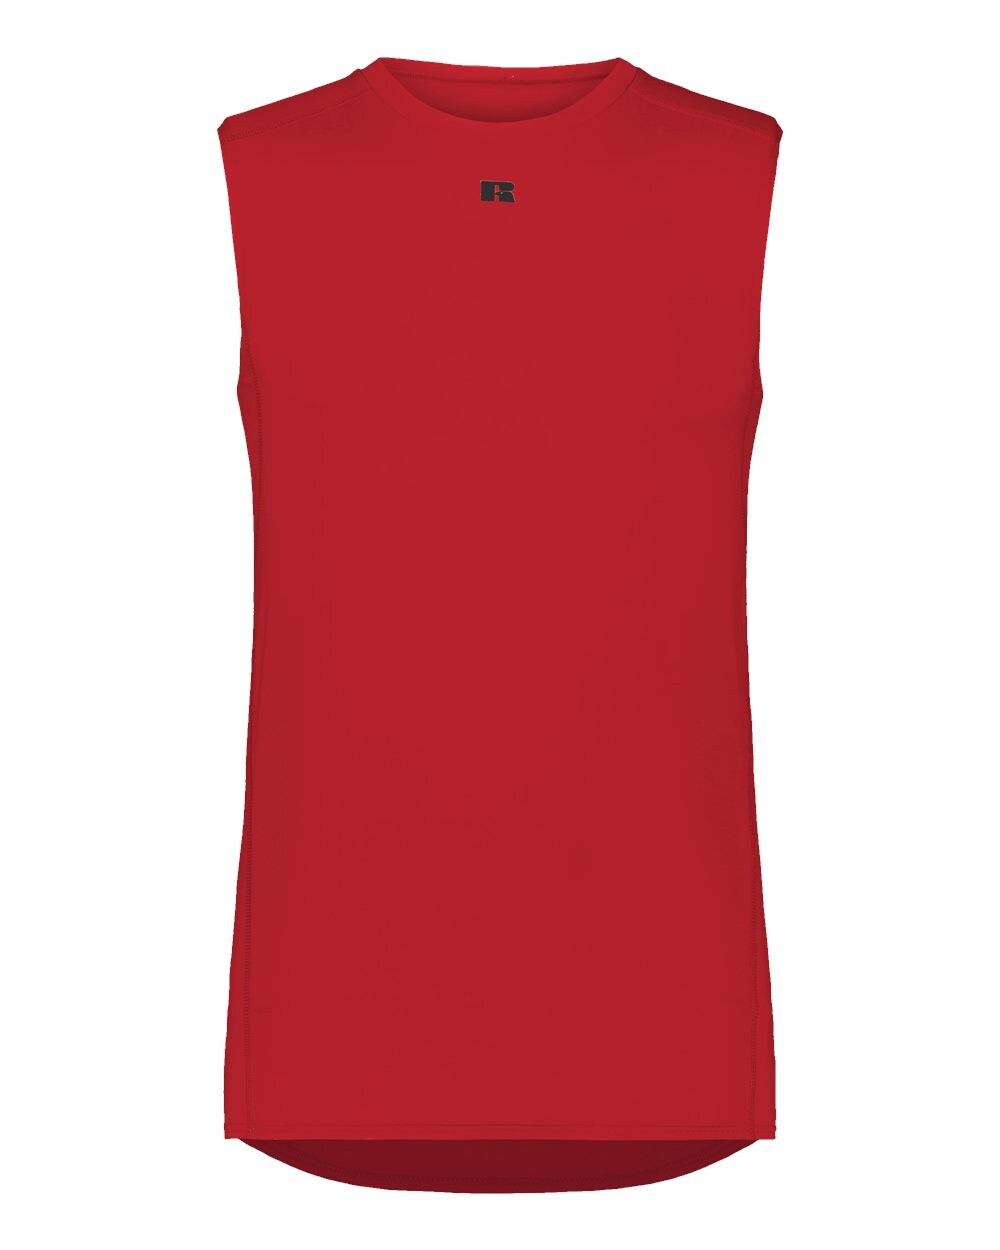 Russell Athletic&#xAE; - CoolCore Compression Tank Top - R22CPM | 84/16 polyester/spandex elastane Xtreme compression cloth | 92/8 polyester/elastane stretch mesh inserts on underarm | Unleash Your Style with Our Trendy Sleeveless shirt